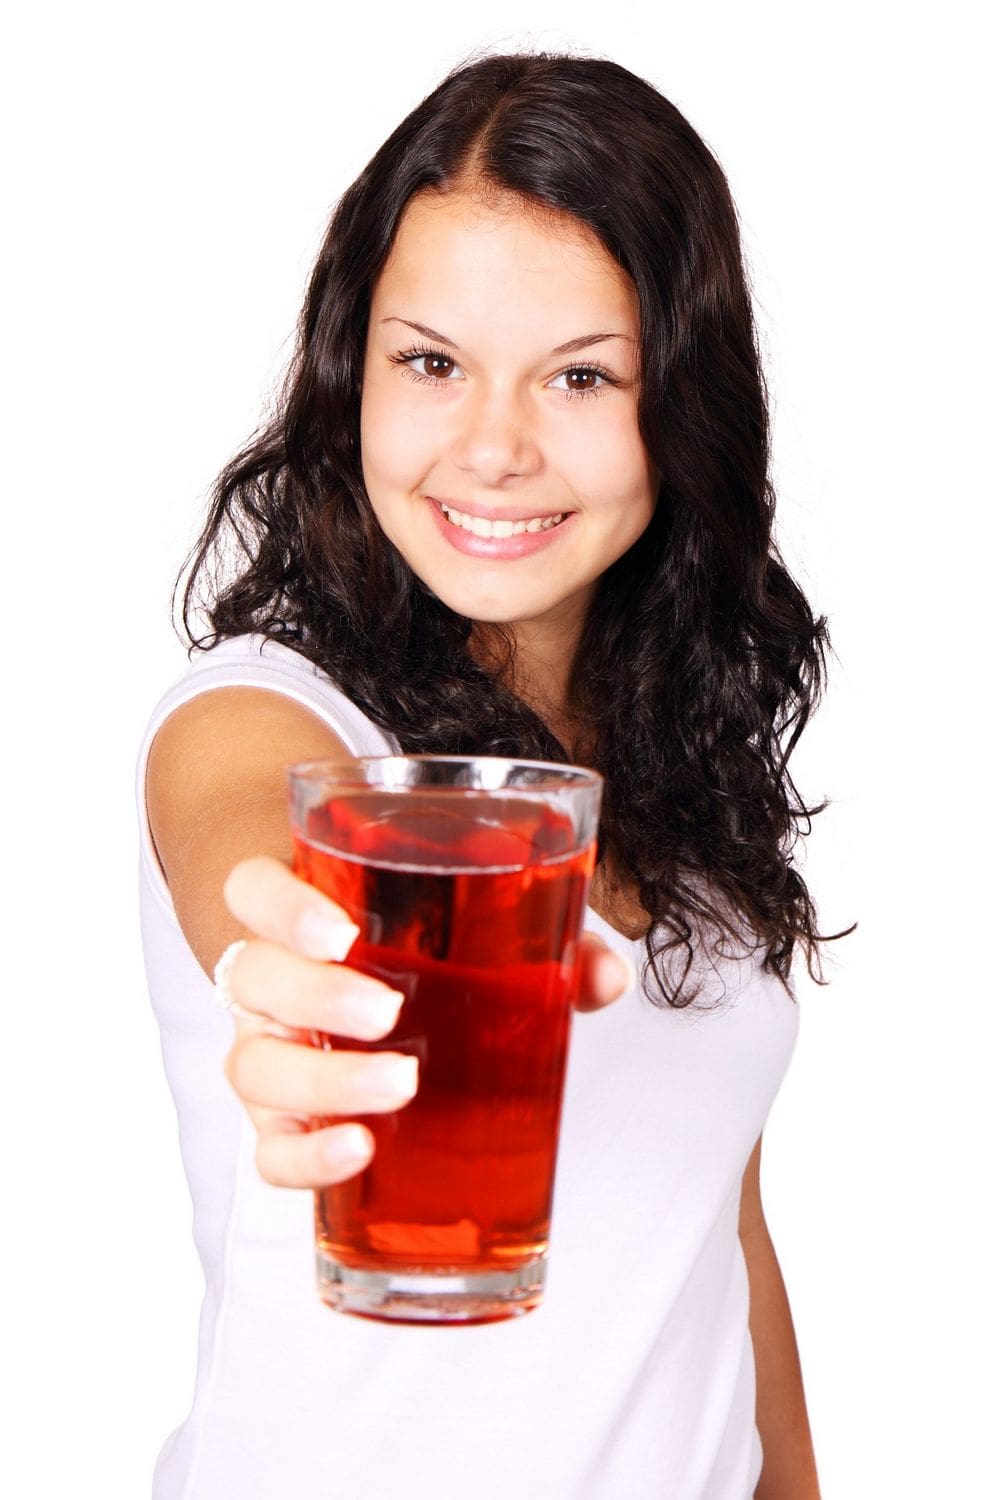 why do girls drink cranberry juice?